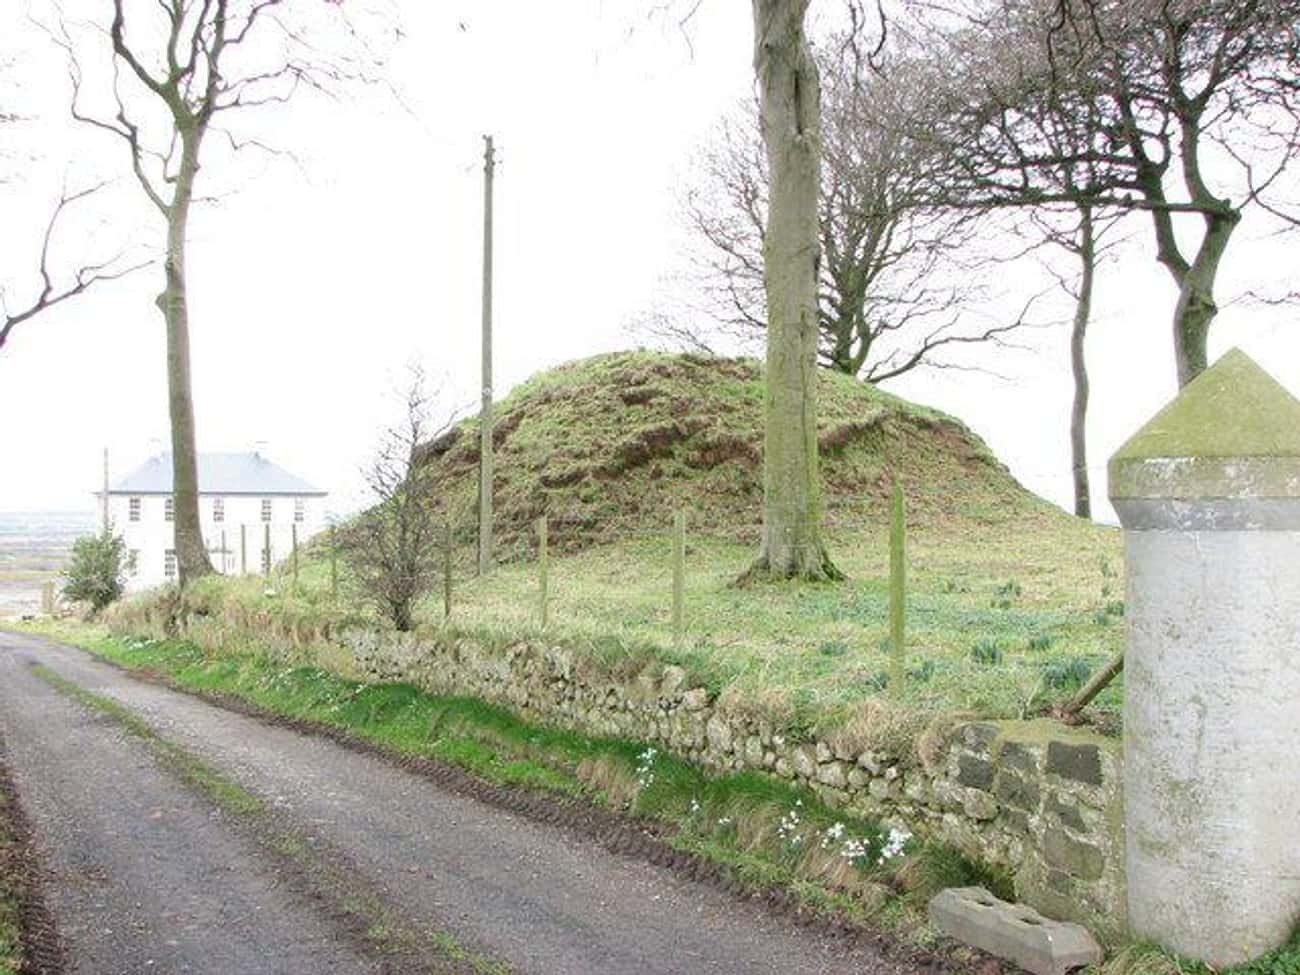 In Ireland, It’s Viewed As Unlucky To Destroy A 'Fairy Fort'